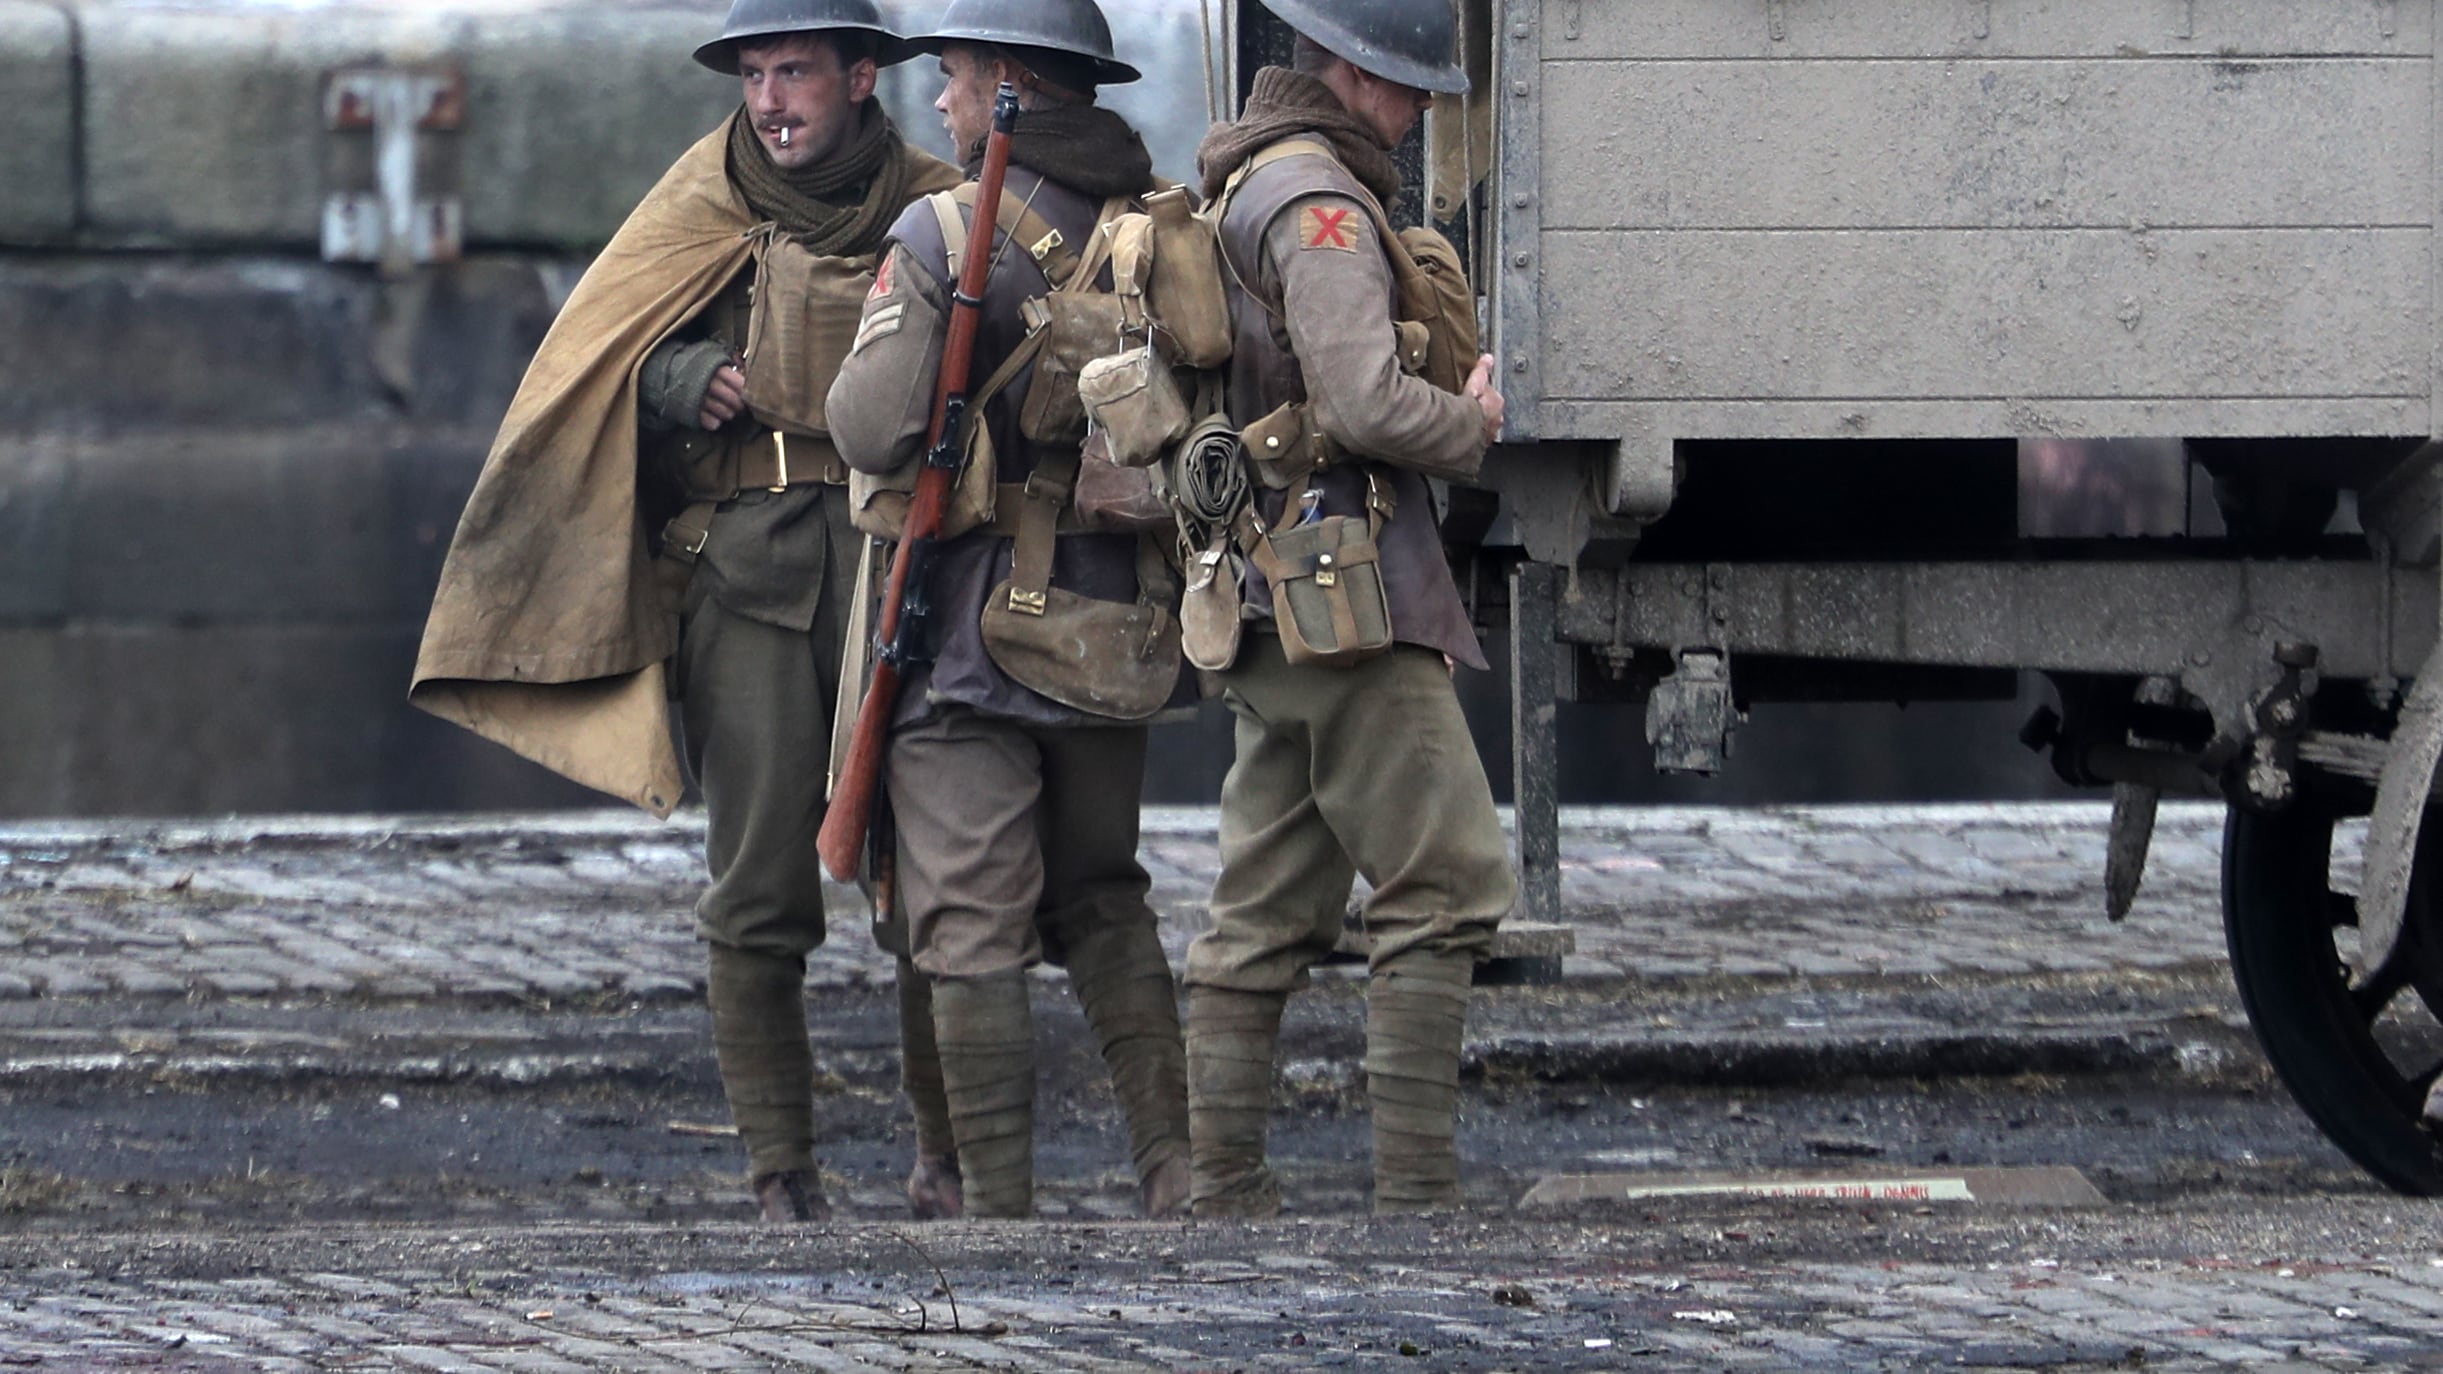 Actors in period costumes on set of Sam Mendes new film 1917